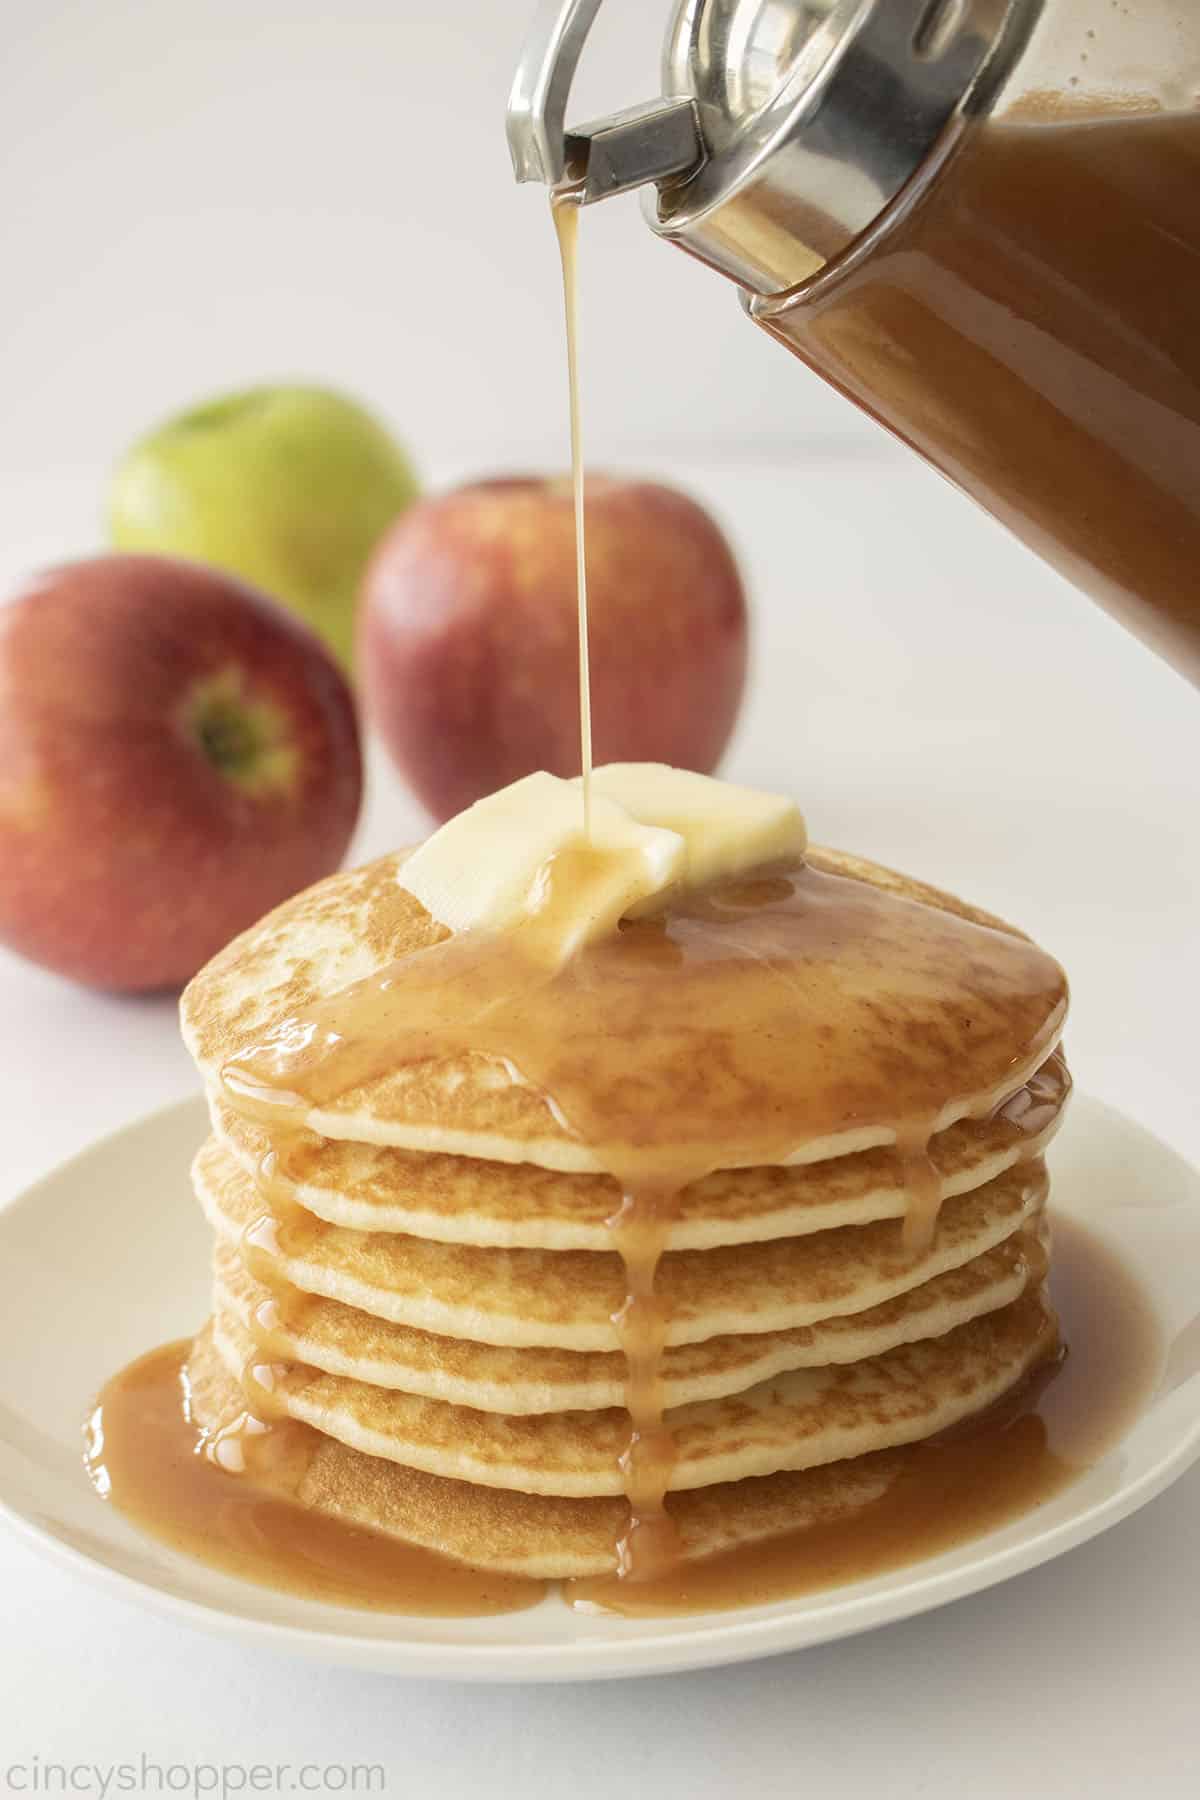 Stack of pancakes with syrup pouring on top- apples in the background.